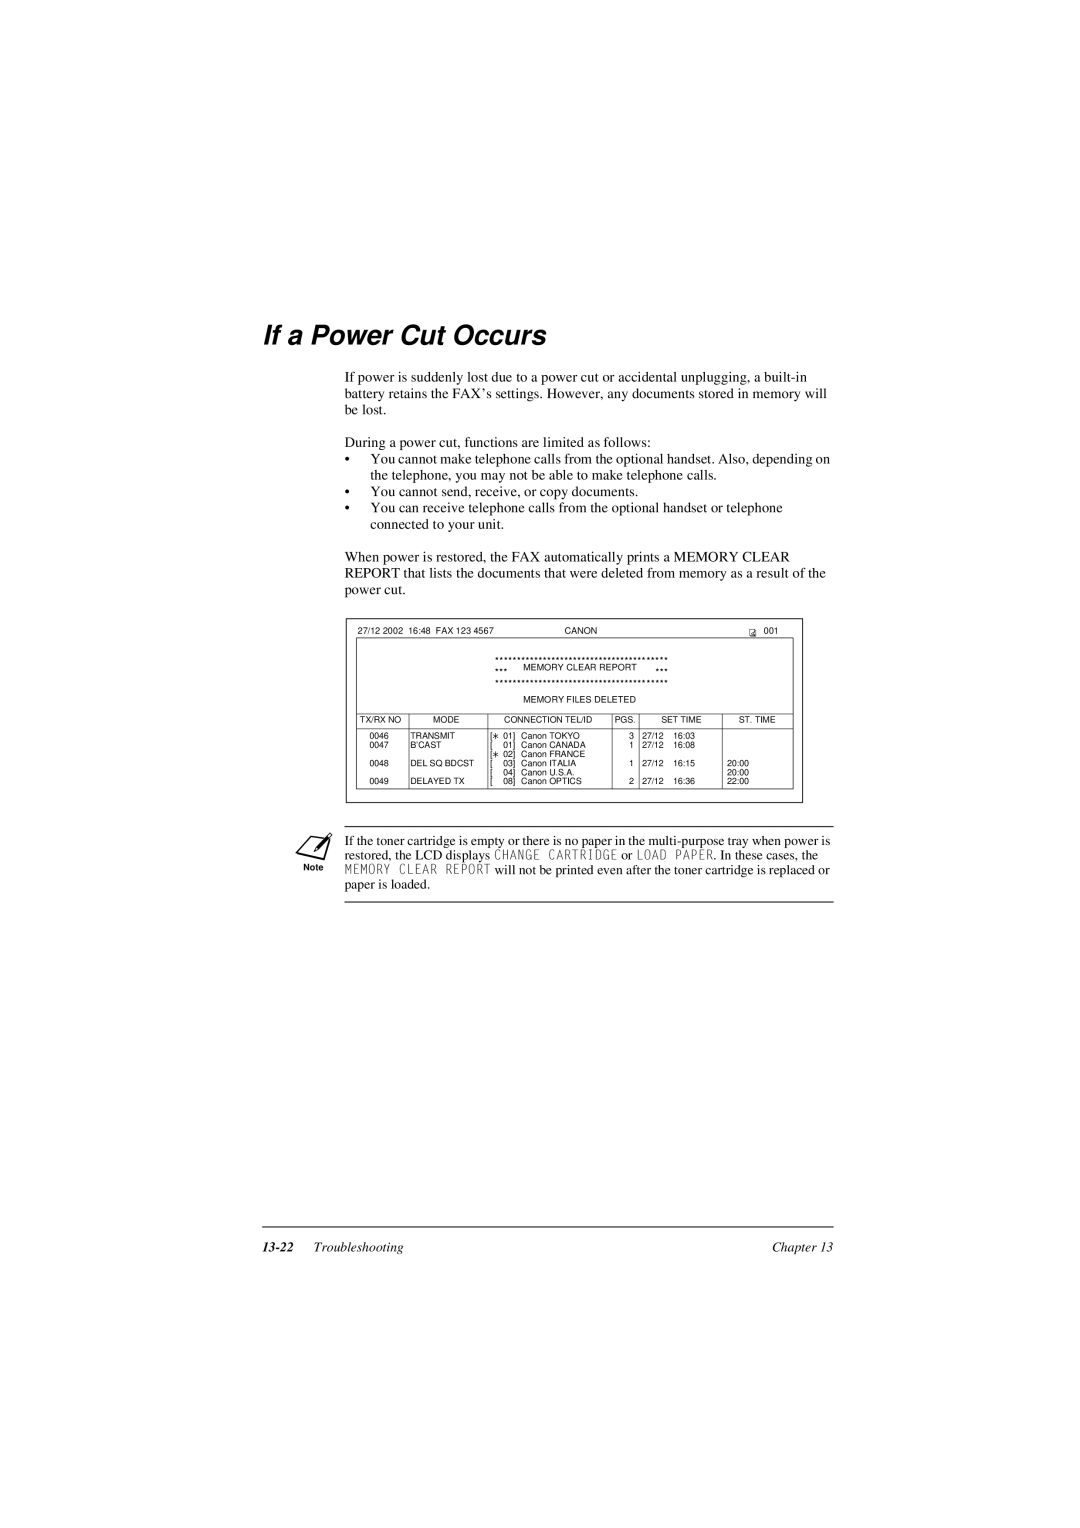 Canon L290, L240 manual If a Power Cut Occurs 